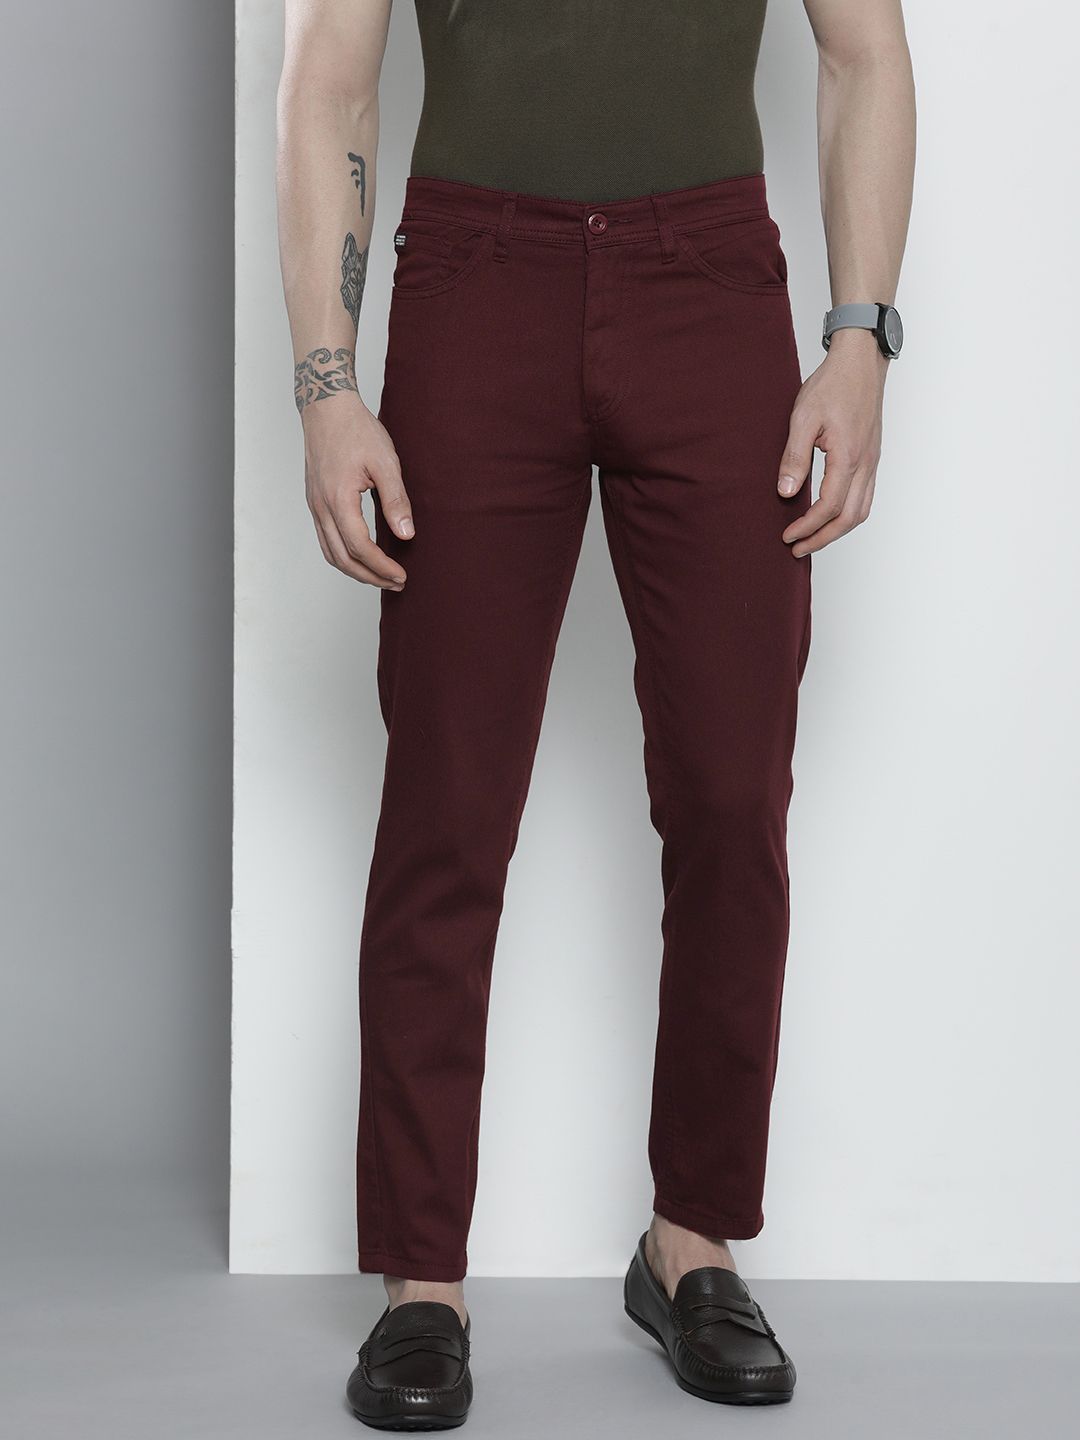 The Indian Garage Co Men Burgundy Solid Chinos Trousers